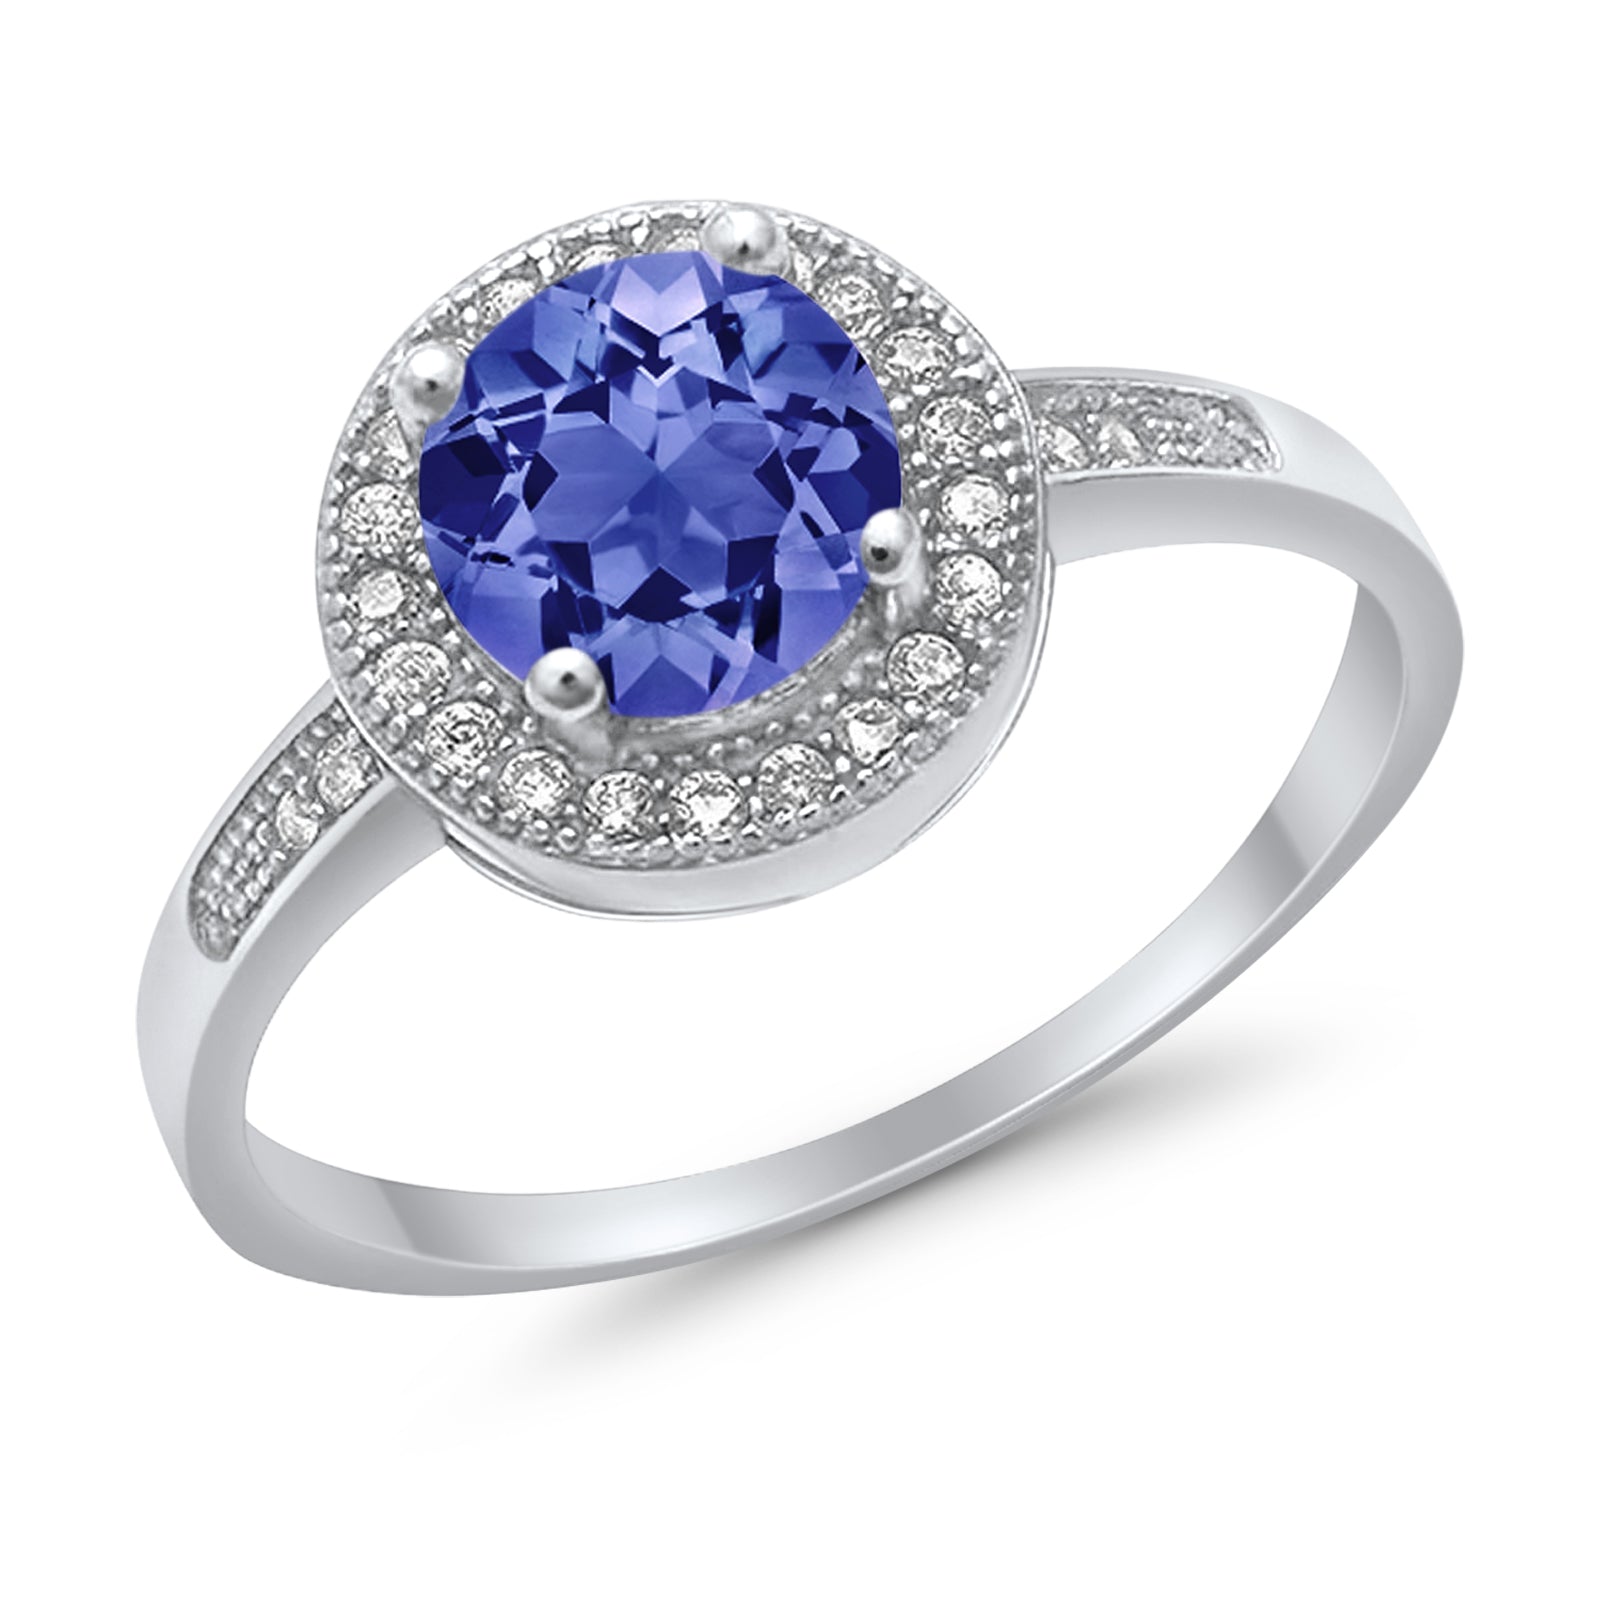 Halo Engagement Ring Round Simulated Tanzanite CZ 925 Sterling Silver